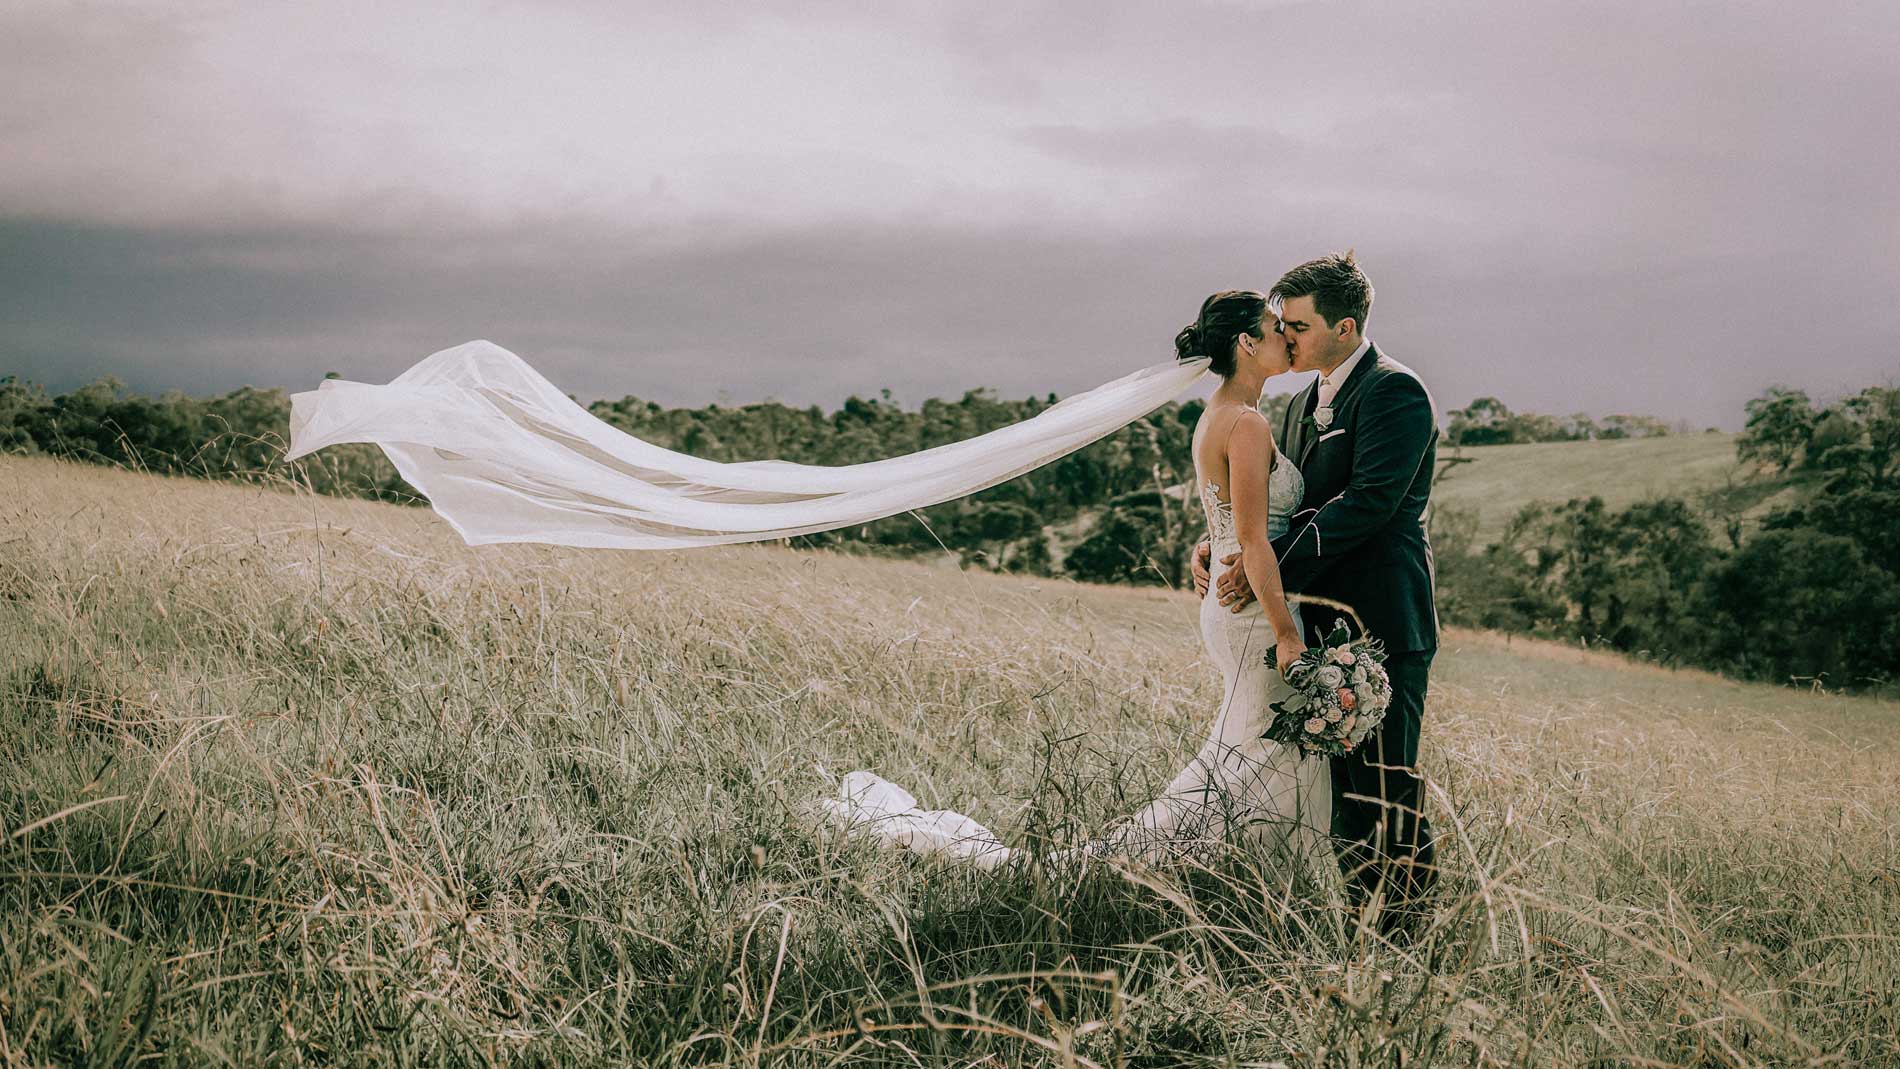 Cinematic photo of the bride and groom as they kiss in the middle of a grass field, with the wind blowing the bride's veil.